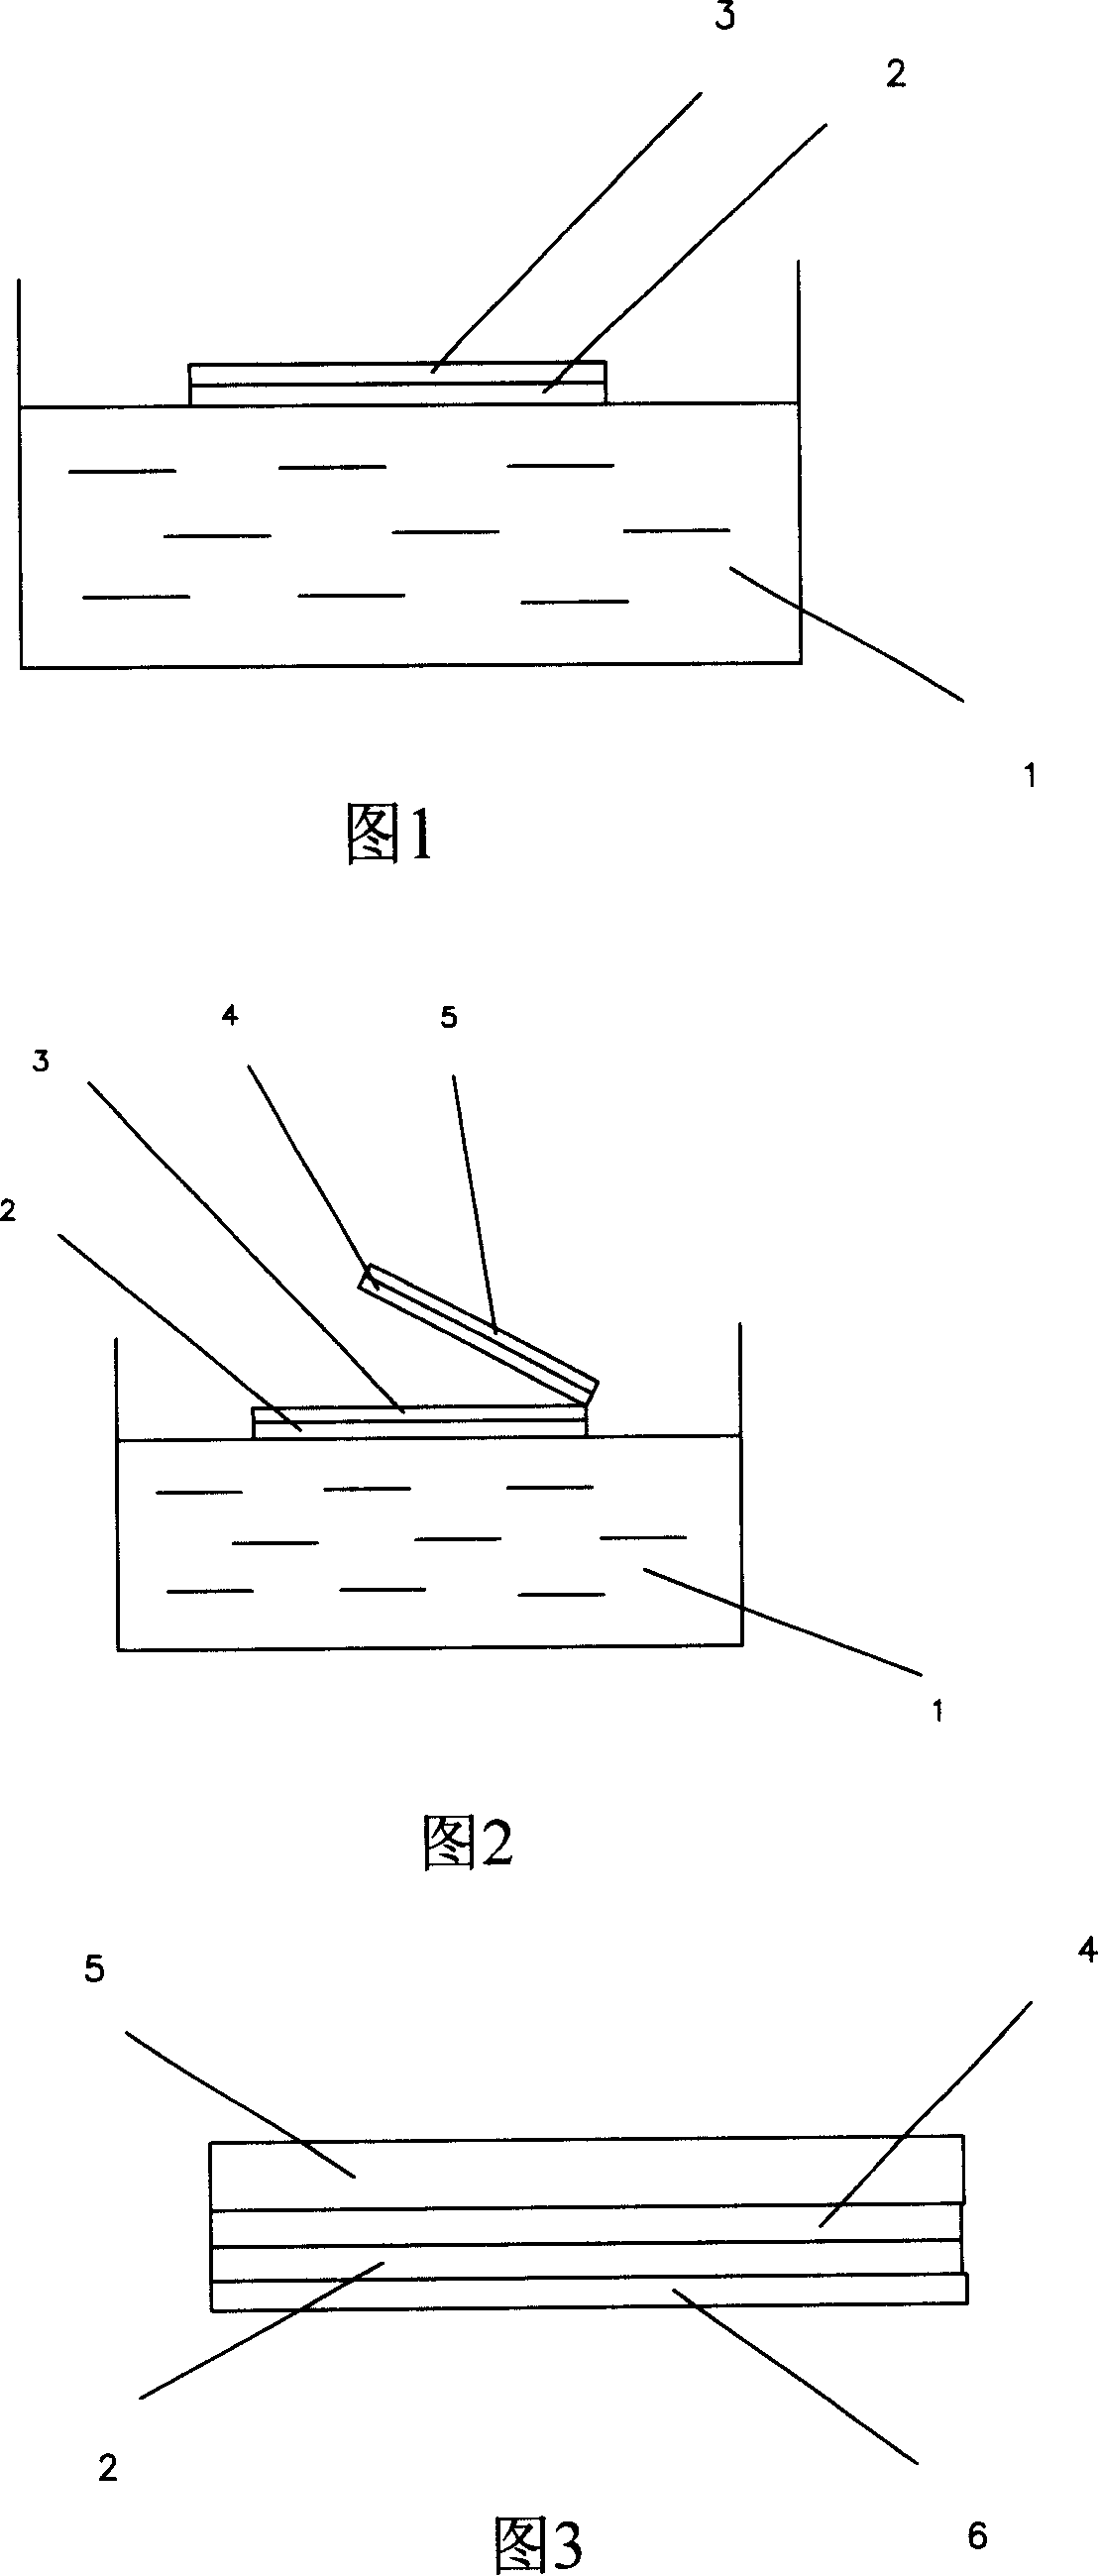 Method for manufacturing wood grain and marble glass